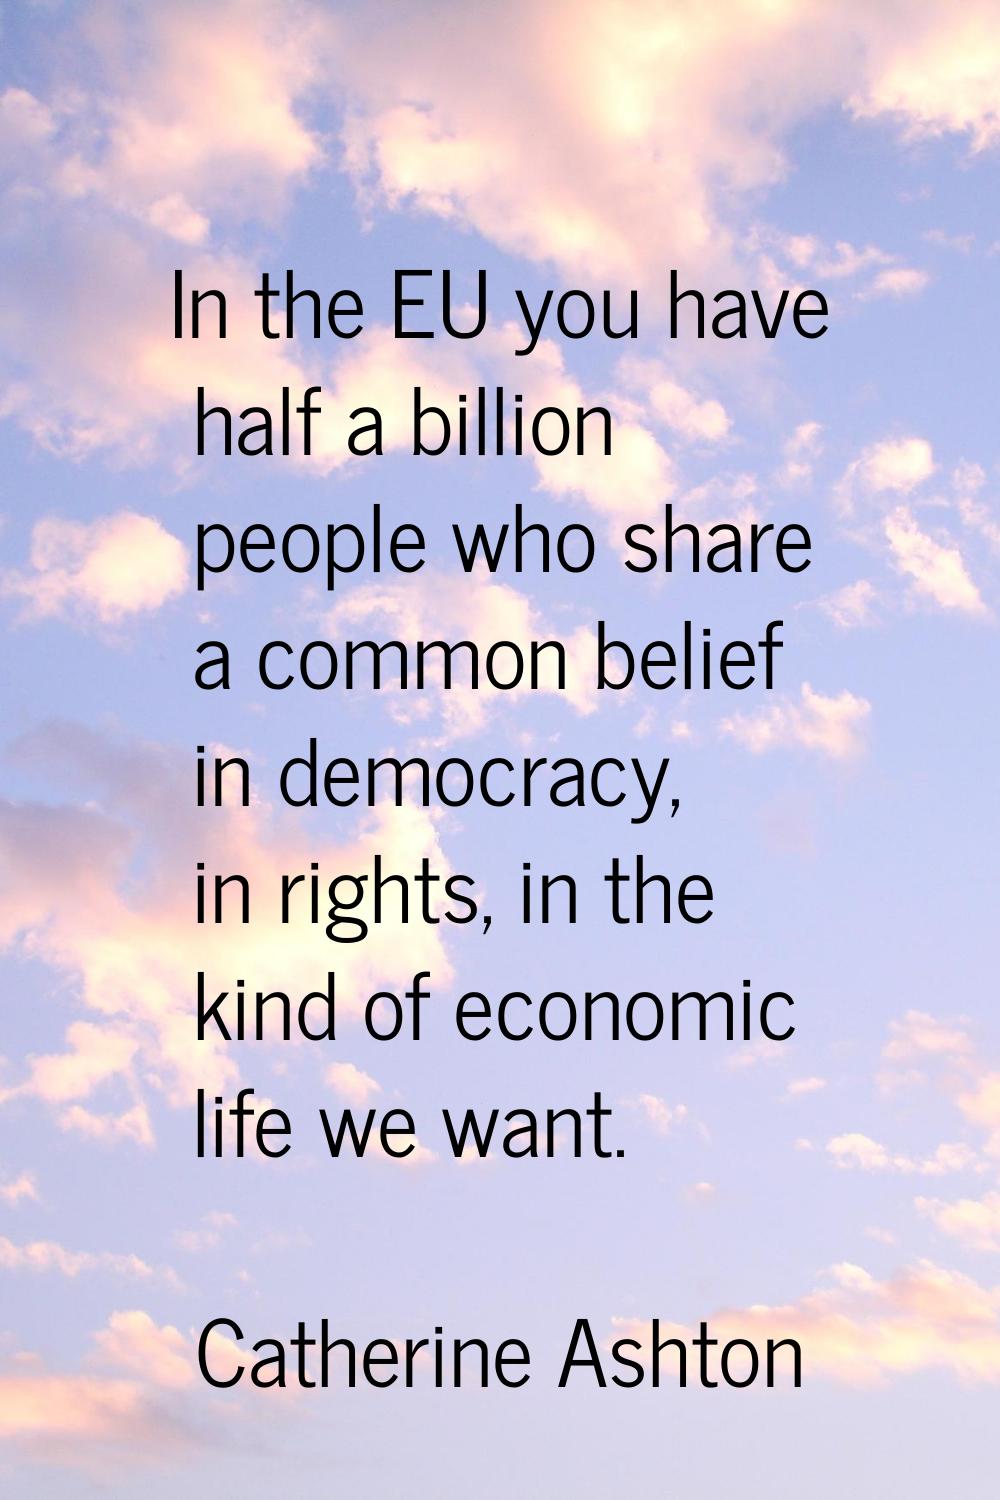 In the EU you have half a billion people who share a common belief in democracy, in rights, in the 